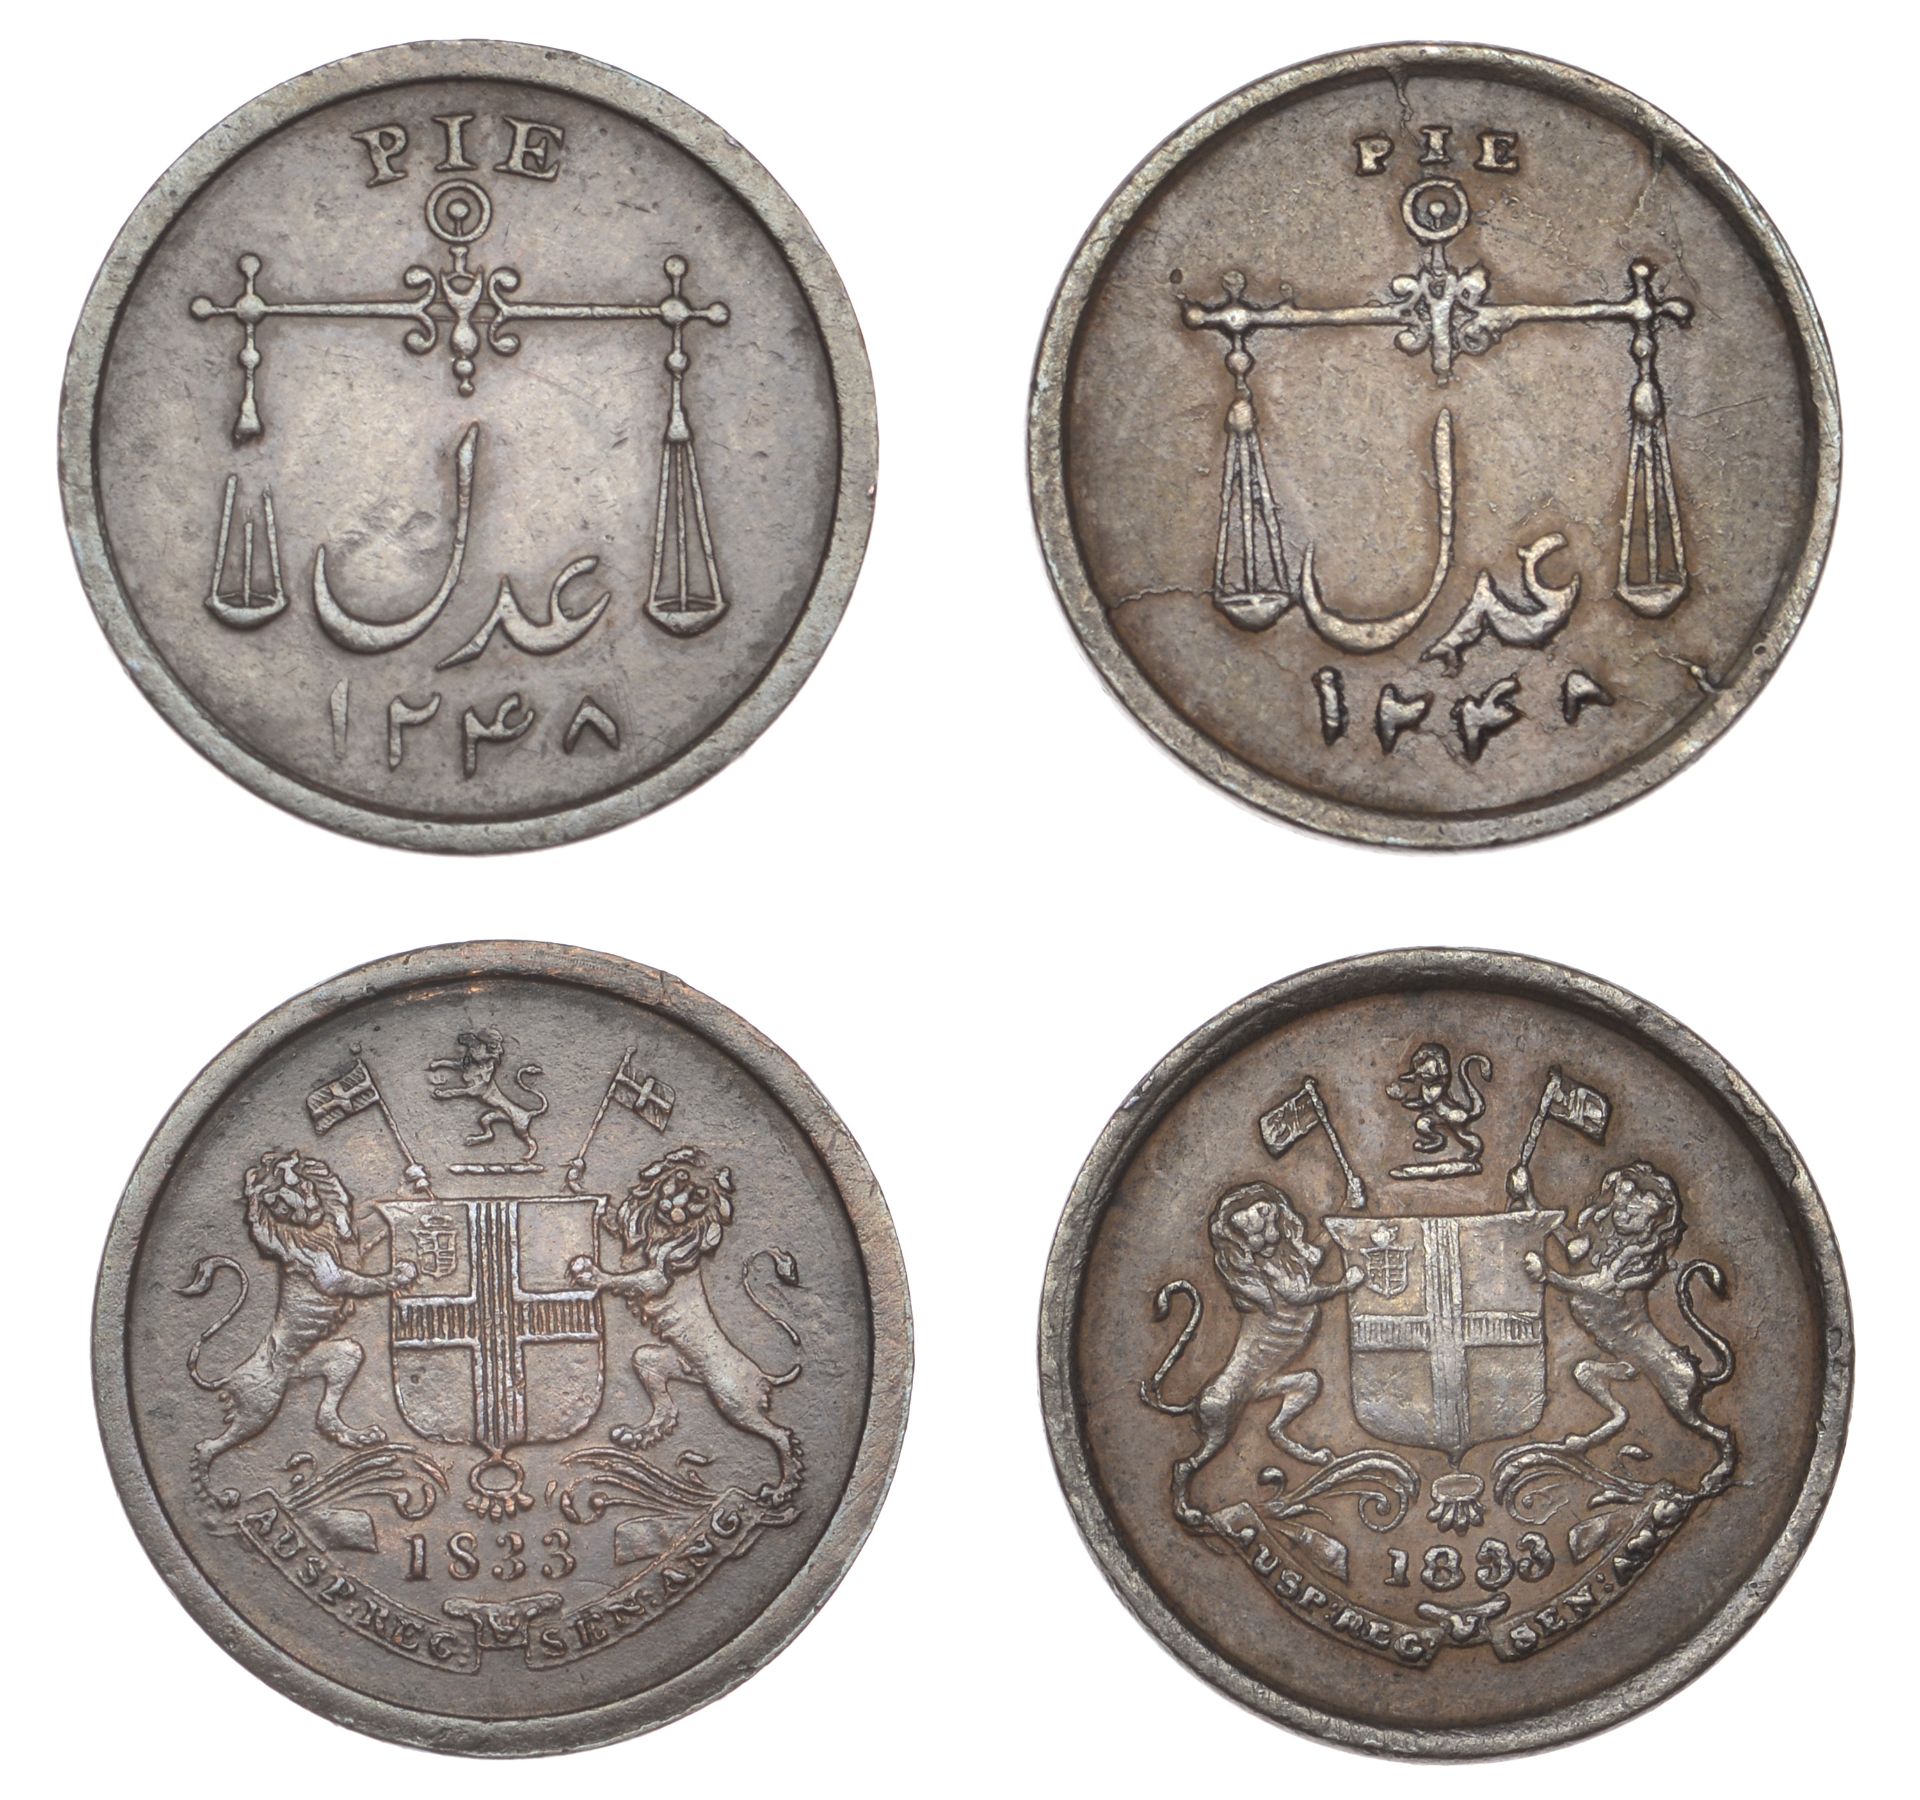 East India Company, Bombay Presidency, Later Uniform coinages, 1830-5, Calcutta dies, copper...